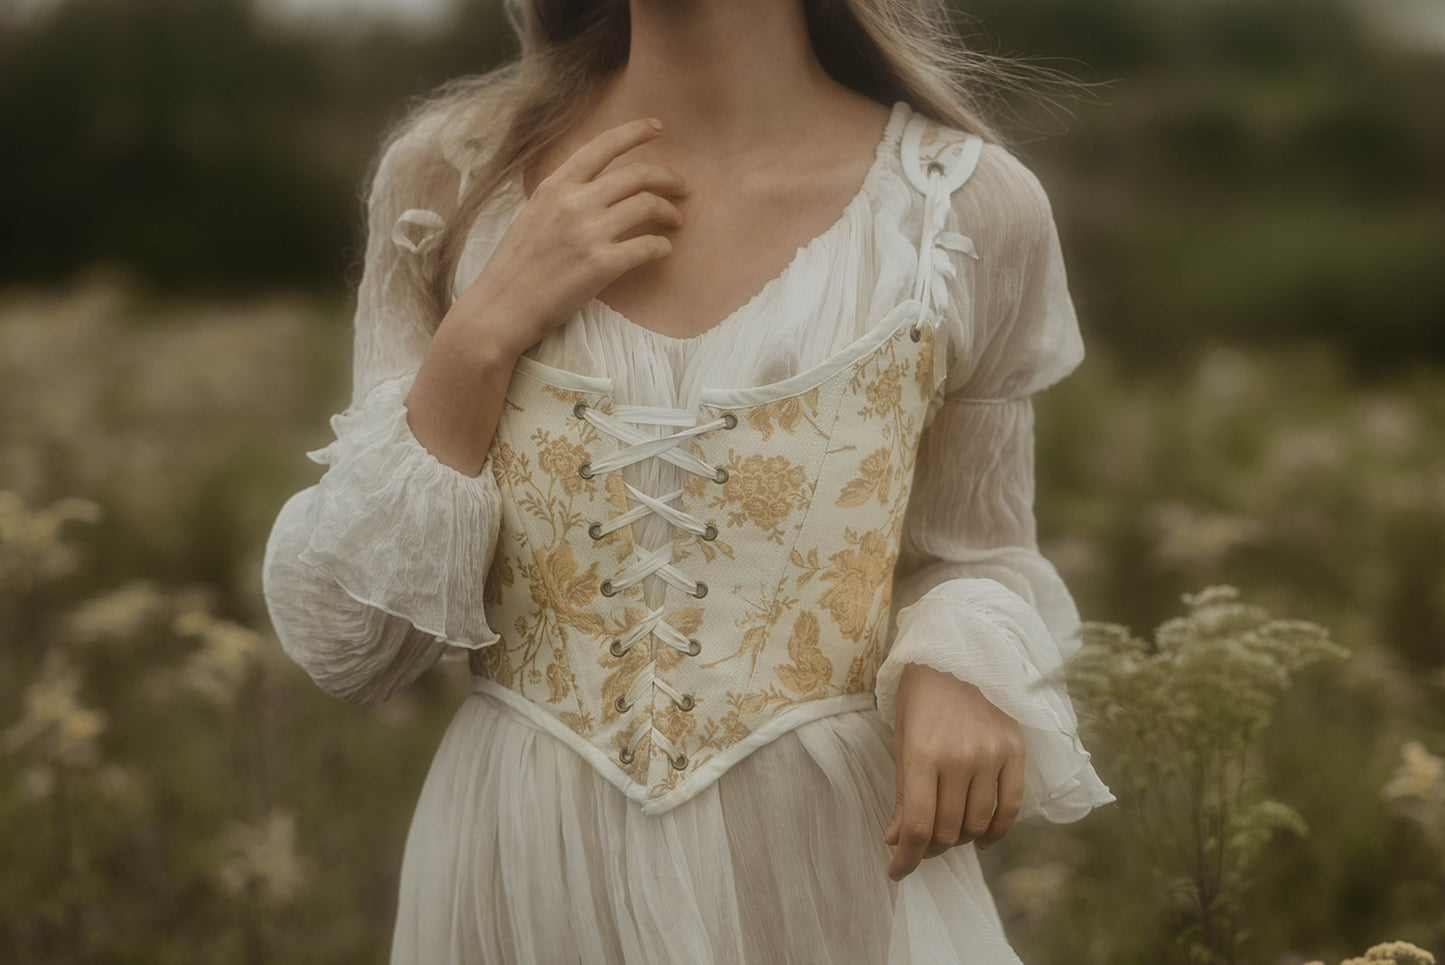 Load image into Gallery viewer, READY TO SHIP Yellow and White Floral Renaissance Corset
